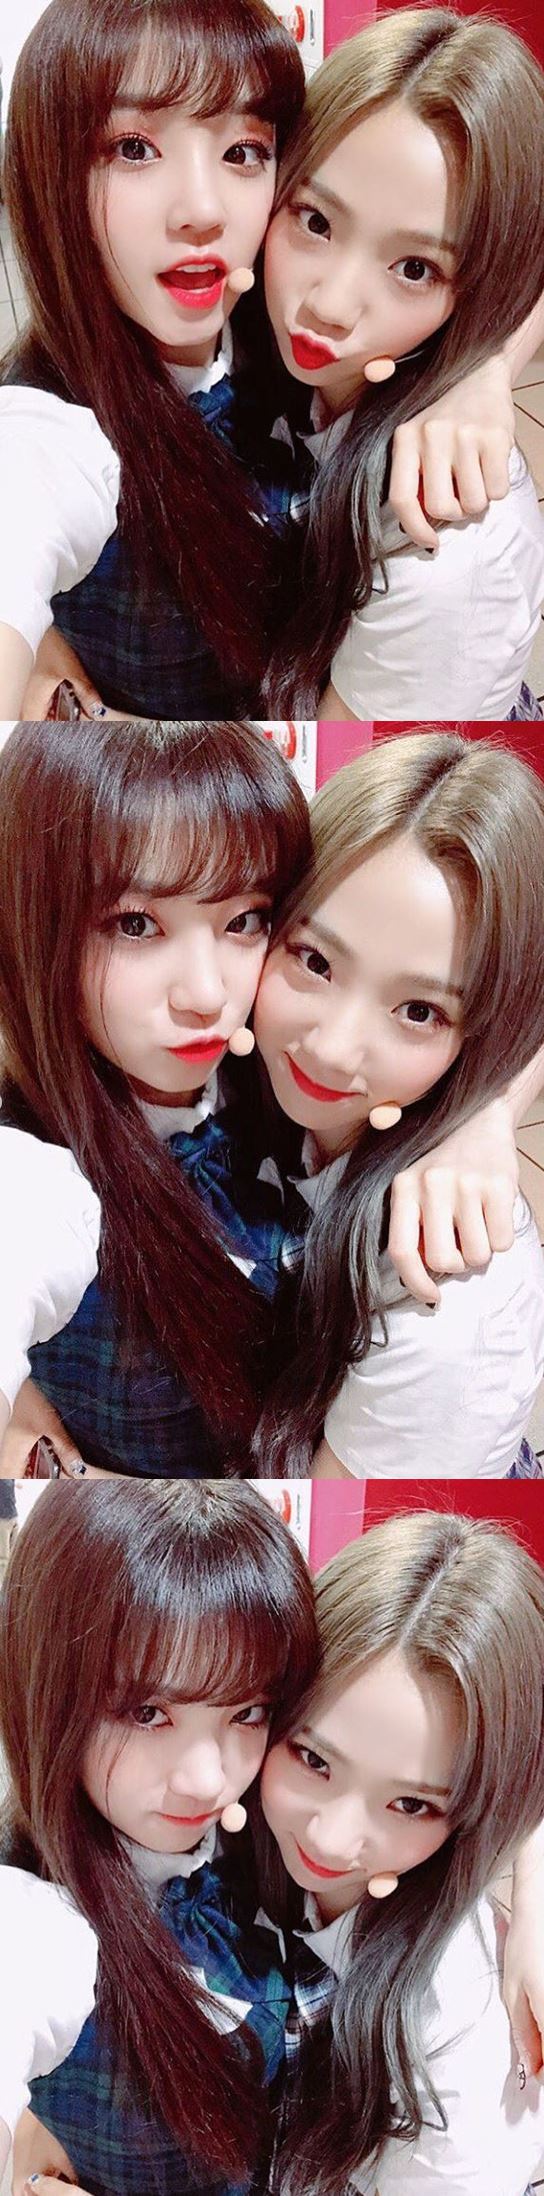 Group (girl) children Song Yuqi and WJSN Summer boasted of friendship.On the 9th WJSN official Instagram, My friend Song Yuqi.Happy waiting time and a photo of the summer and (girl) children Song Yuqi meeting at the Solo Day Waiting room scene.In the public photos, two people hugging each other are showing cuteness with three kinds of expressions.Meanwhile, (girl) children are working as a new song Han, and WJSN is about to come back on the 19th.Photo: WJSN Official Instagram